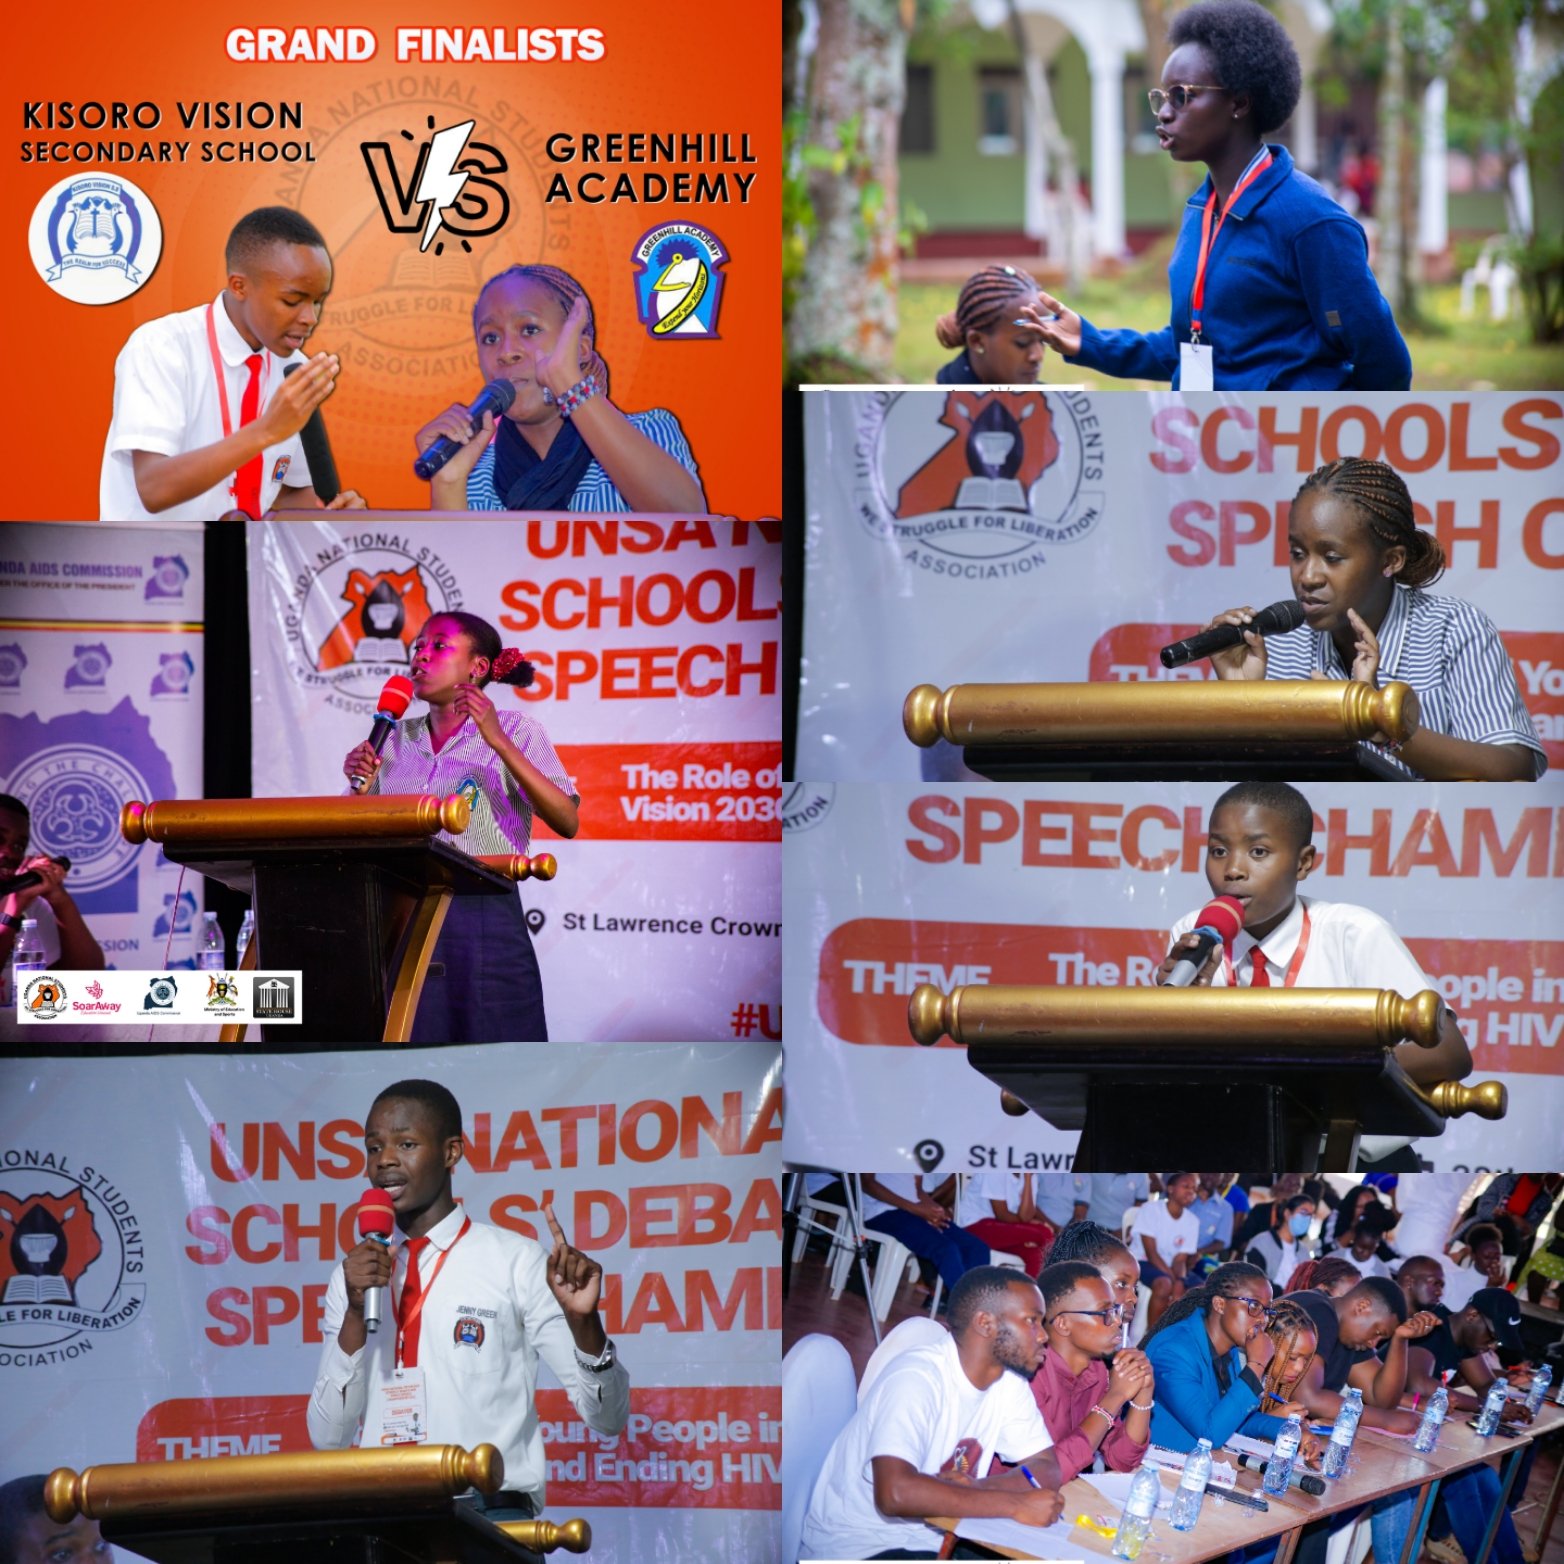 Champions in the UNSA - Secondary Schools Debate and Speech Championship.